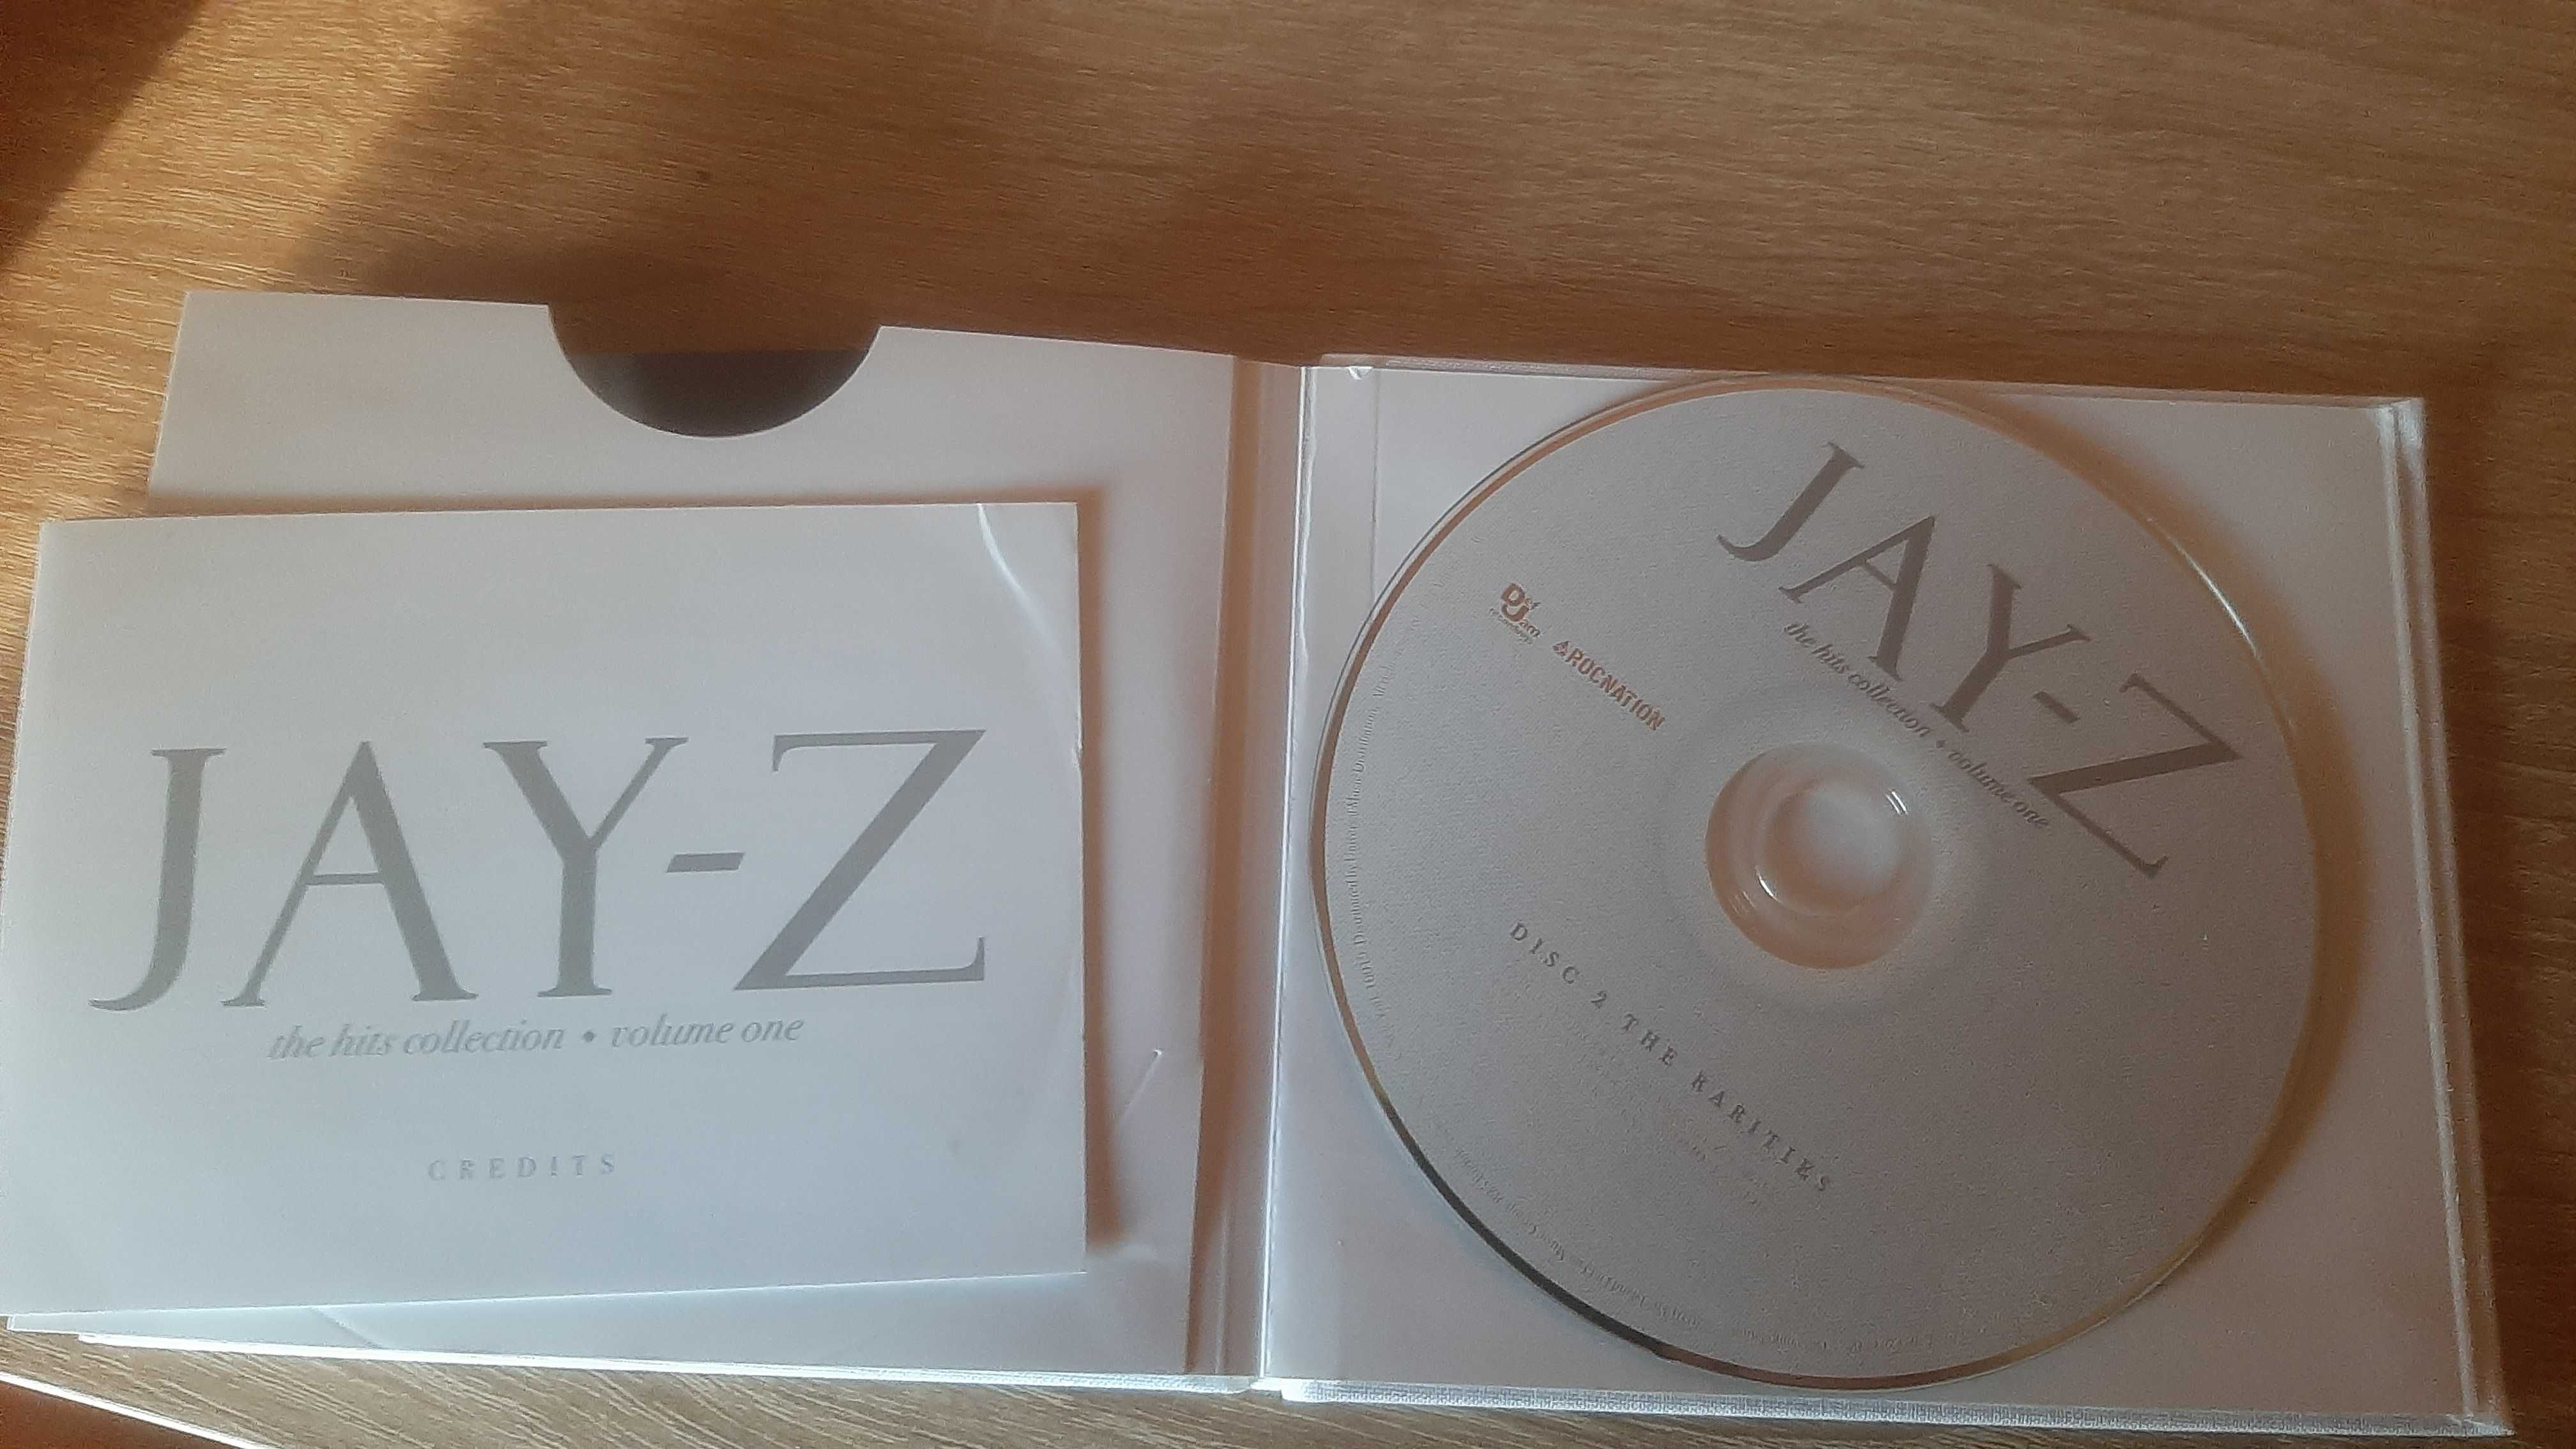 Jay-Z – The Hits Collection - Volume One